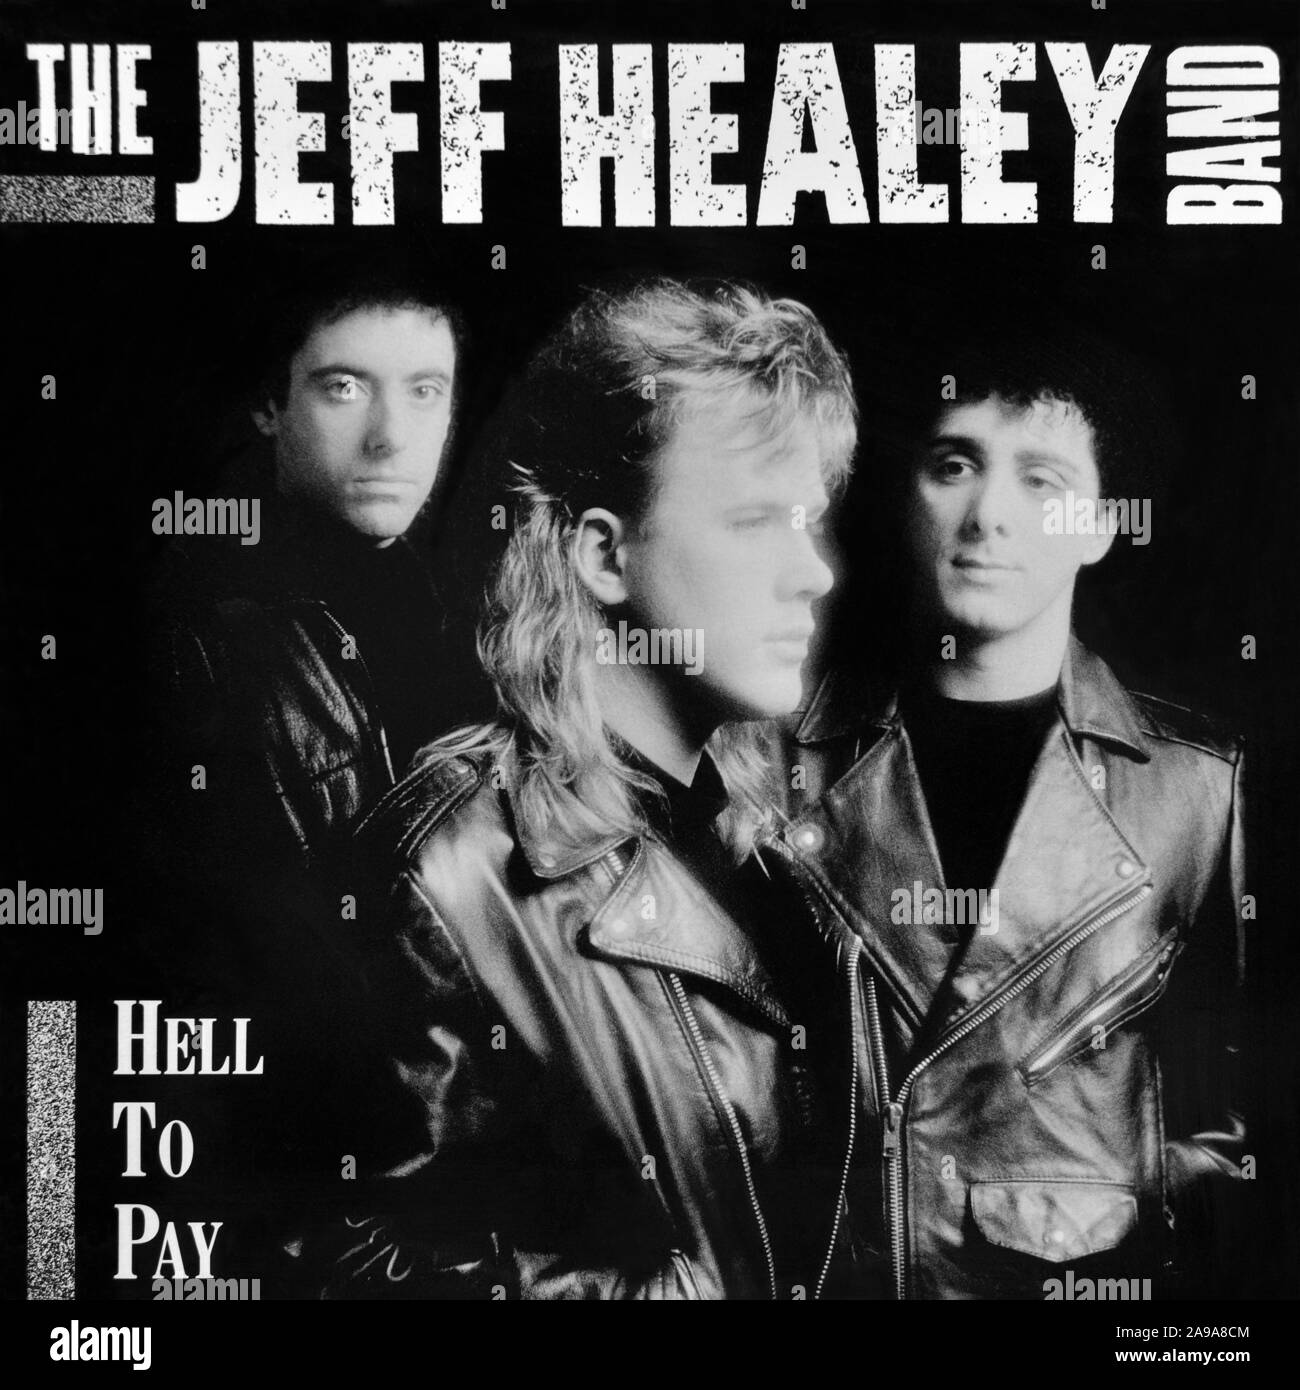 The Jeff Healey Band - original vinyl album cover - Hell To Pay - 1990 Stock Photo